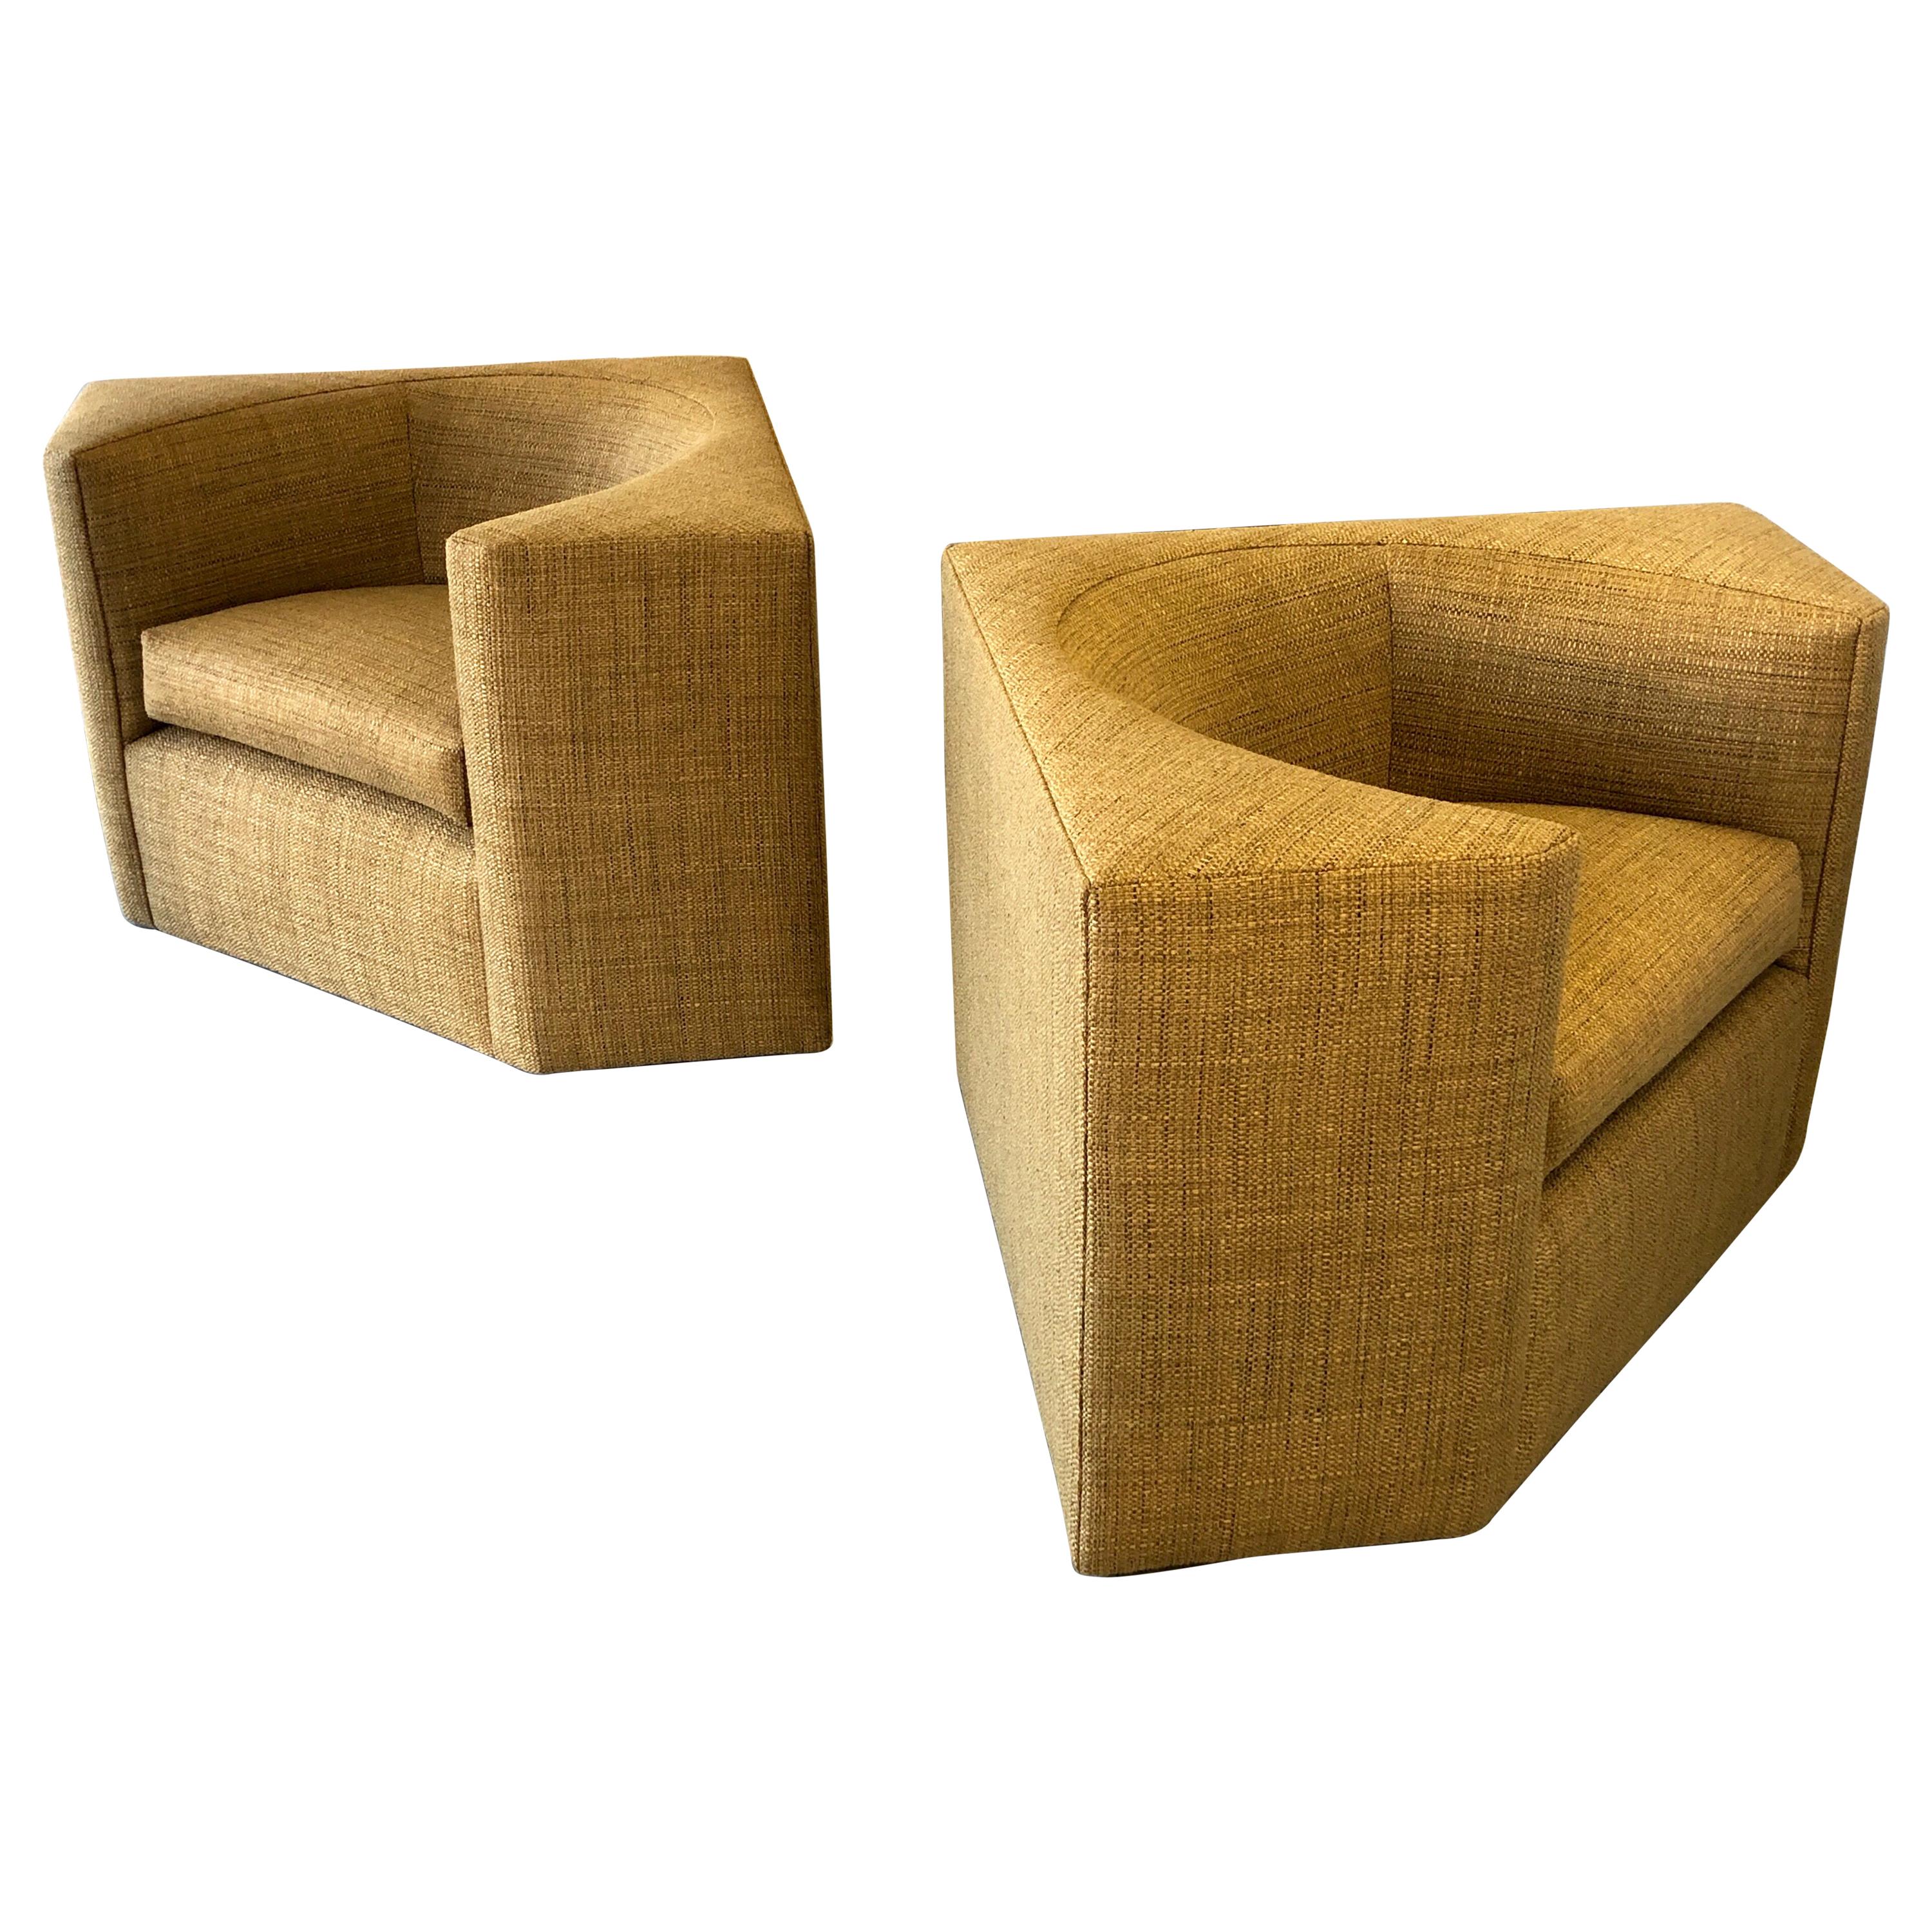 Pair of Modern Cube Lounge Club Chairs, 1970s